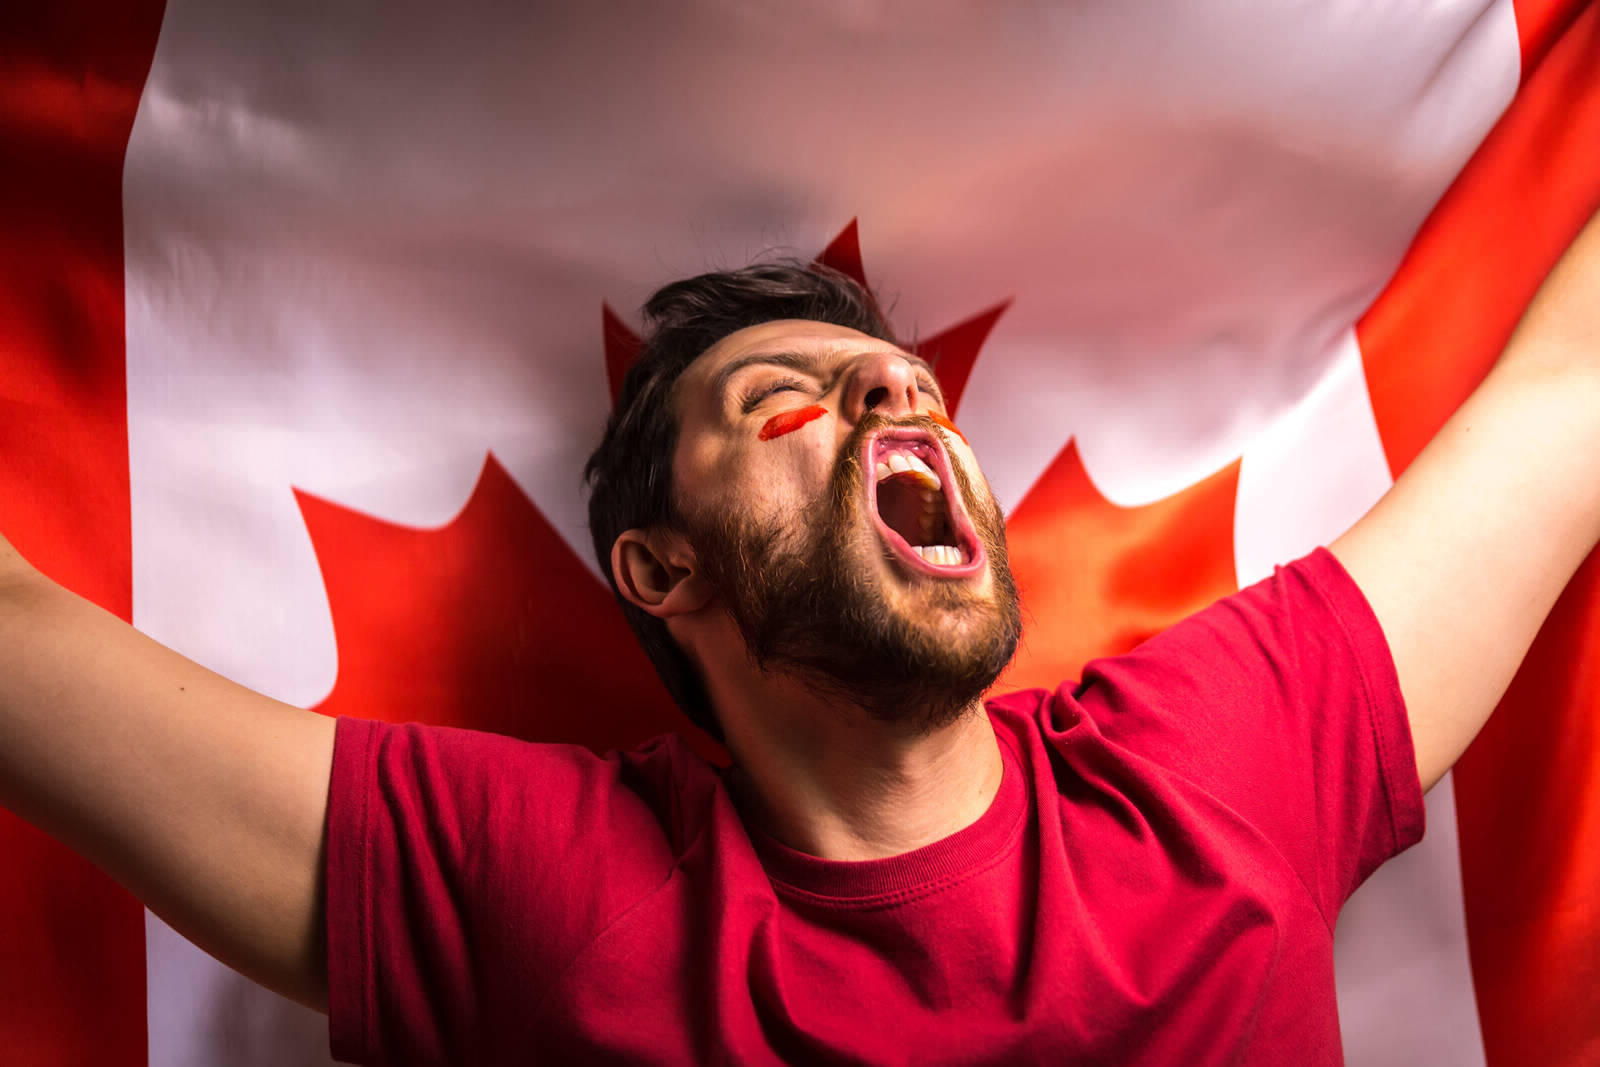 A beared man wearing a red shirt is yelling to the sky wearing the Canadian flag like an outstretched cape.